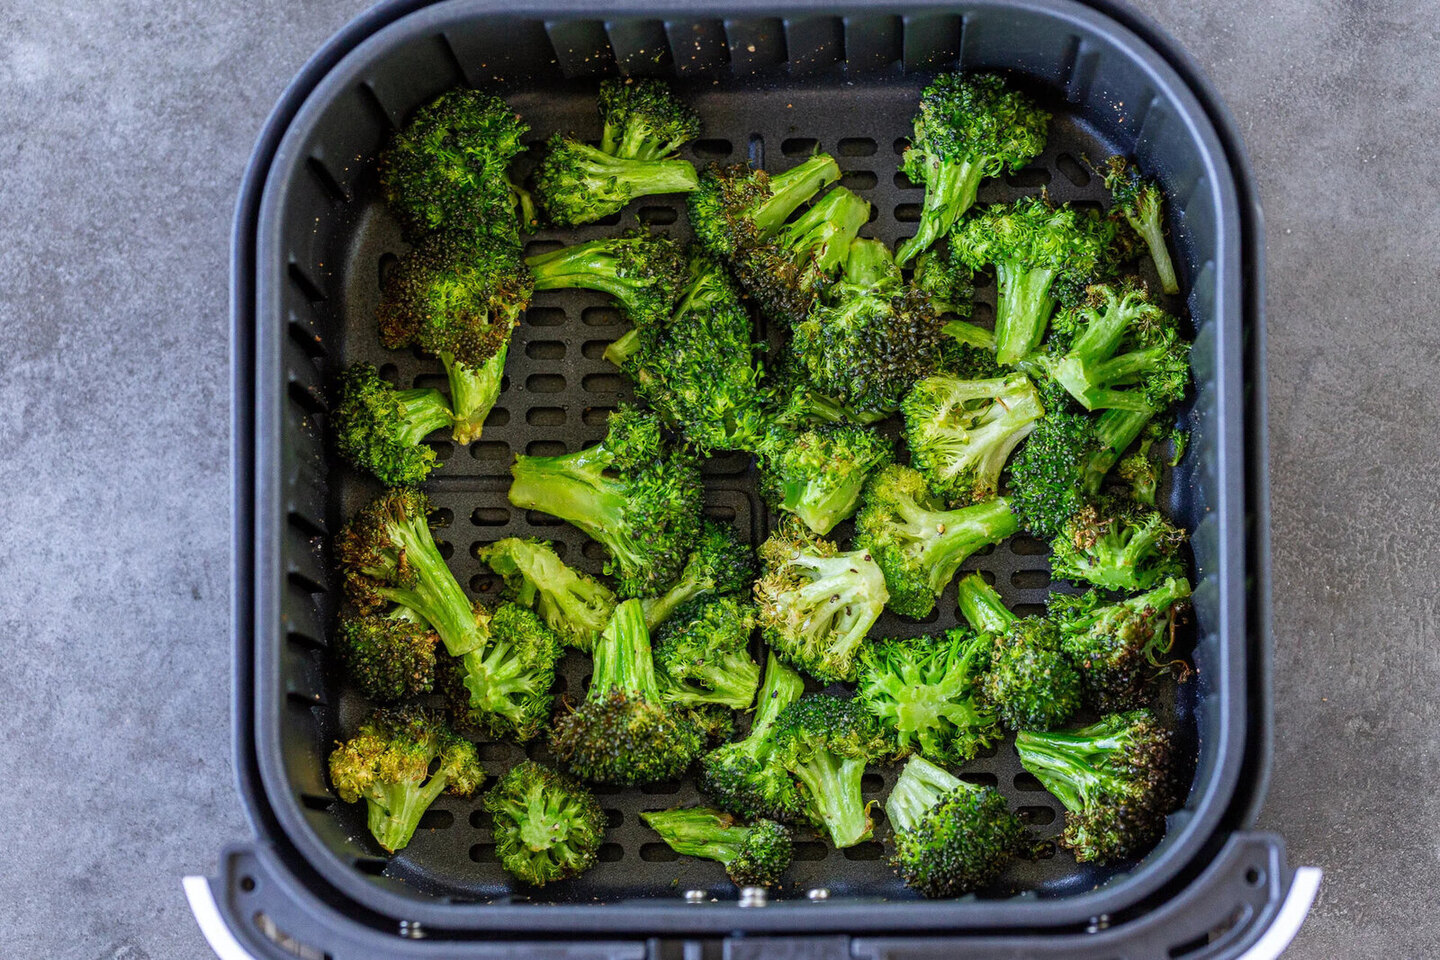 How To Cook Broccoli In An Air Fryer